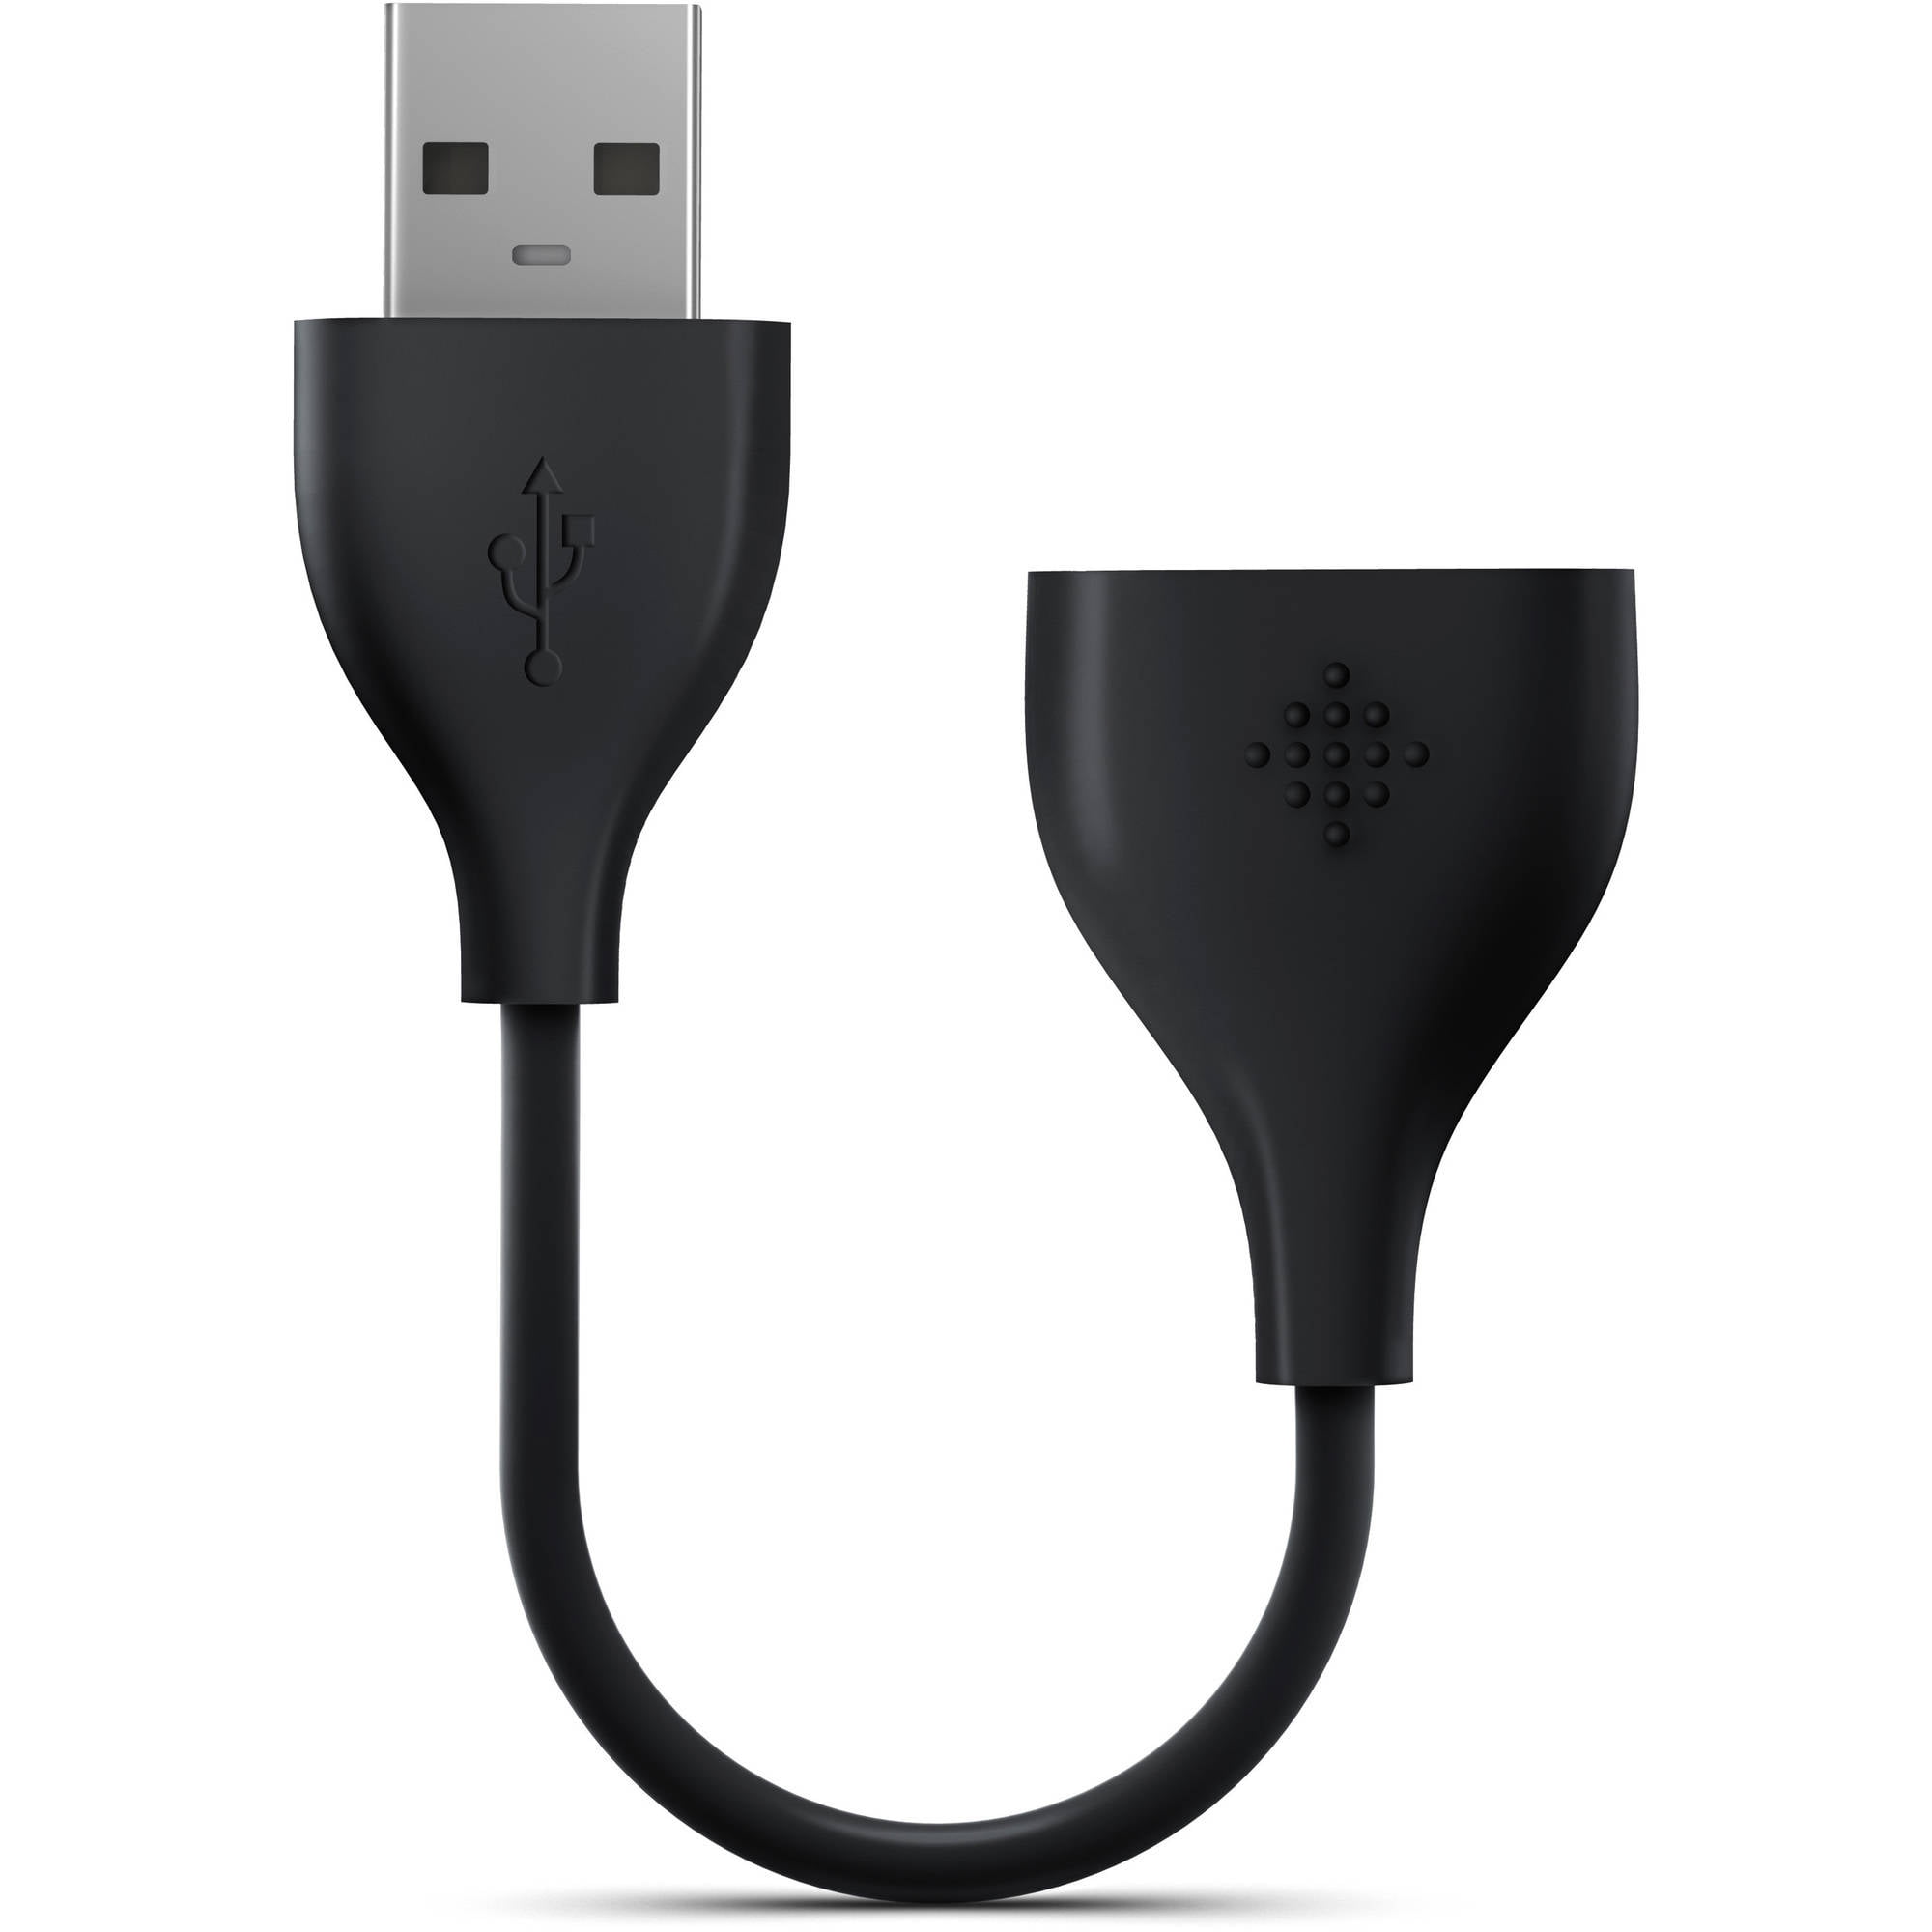 target fitbit charger